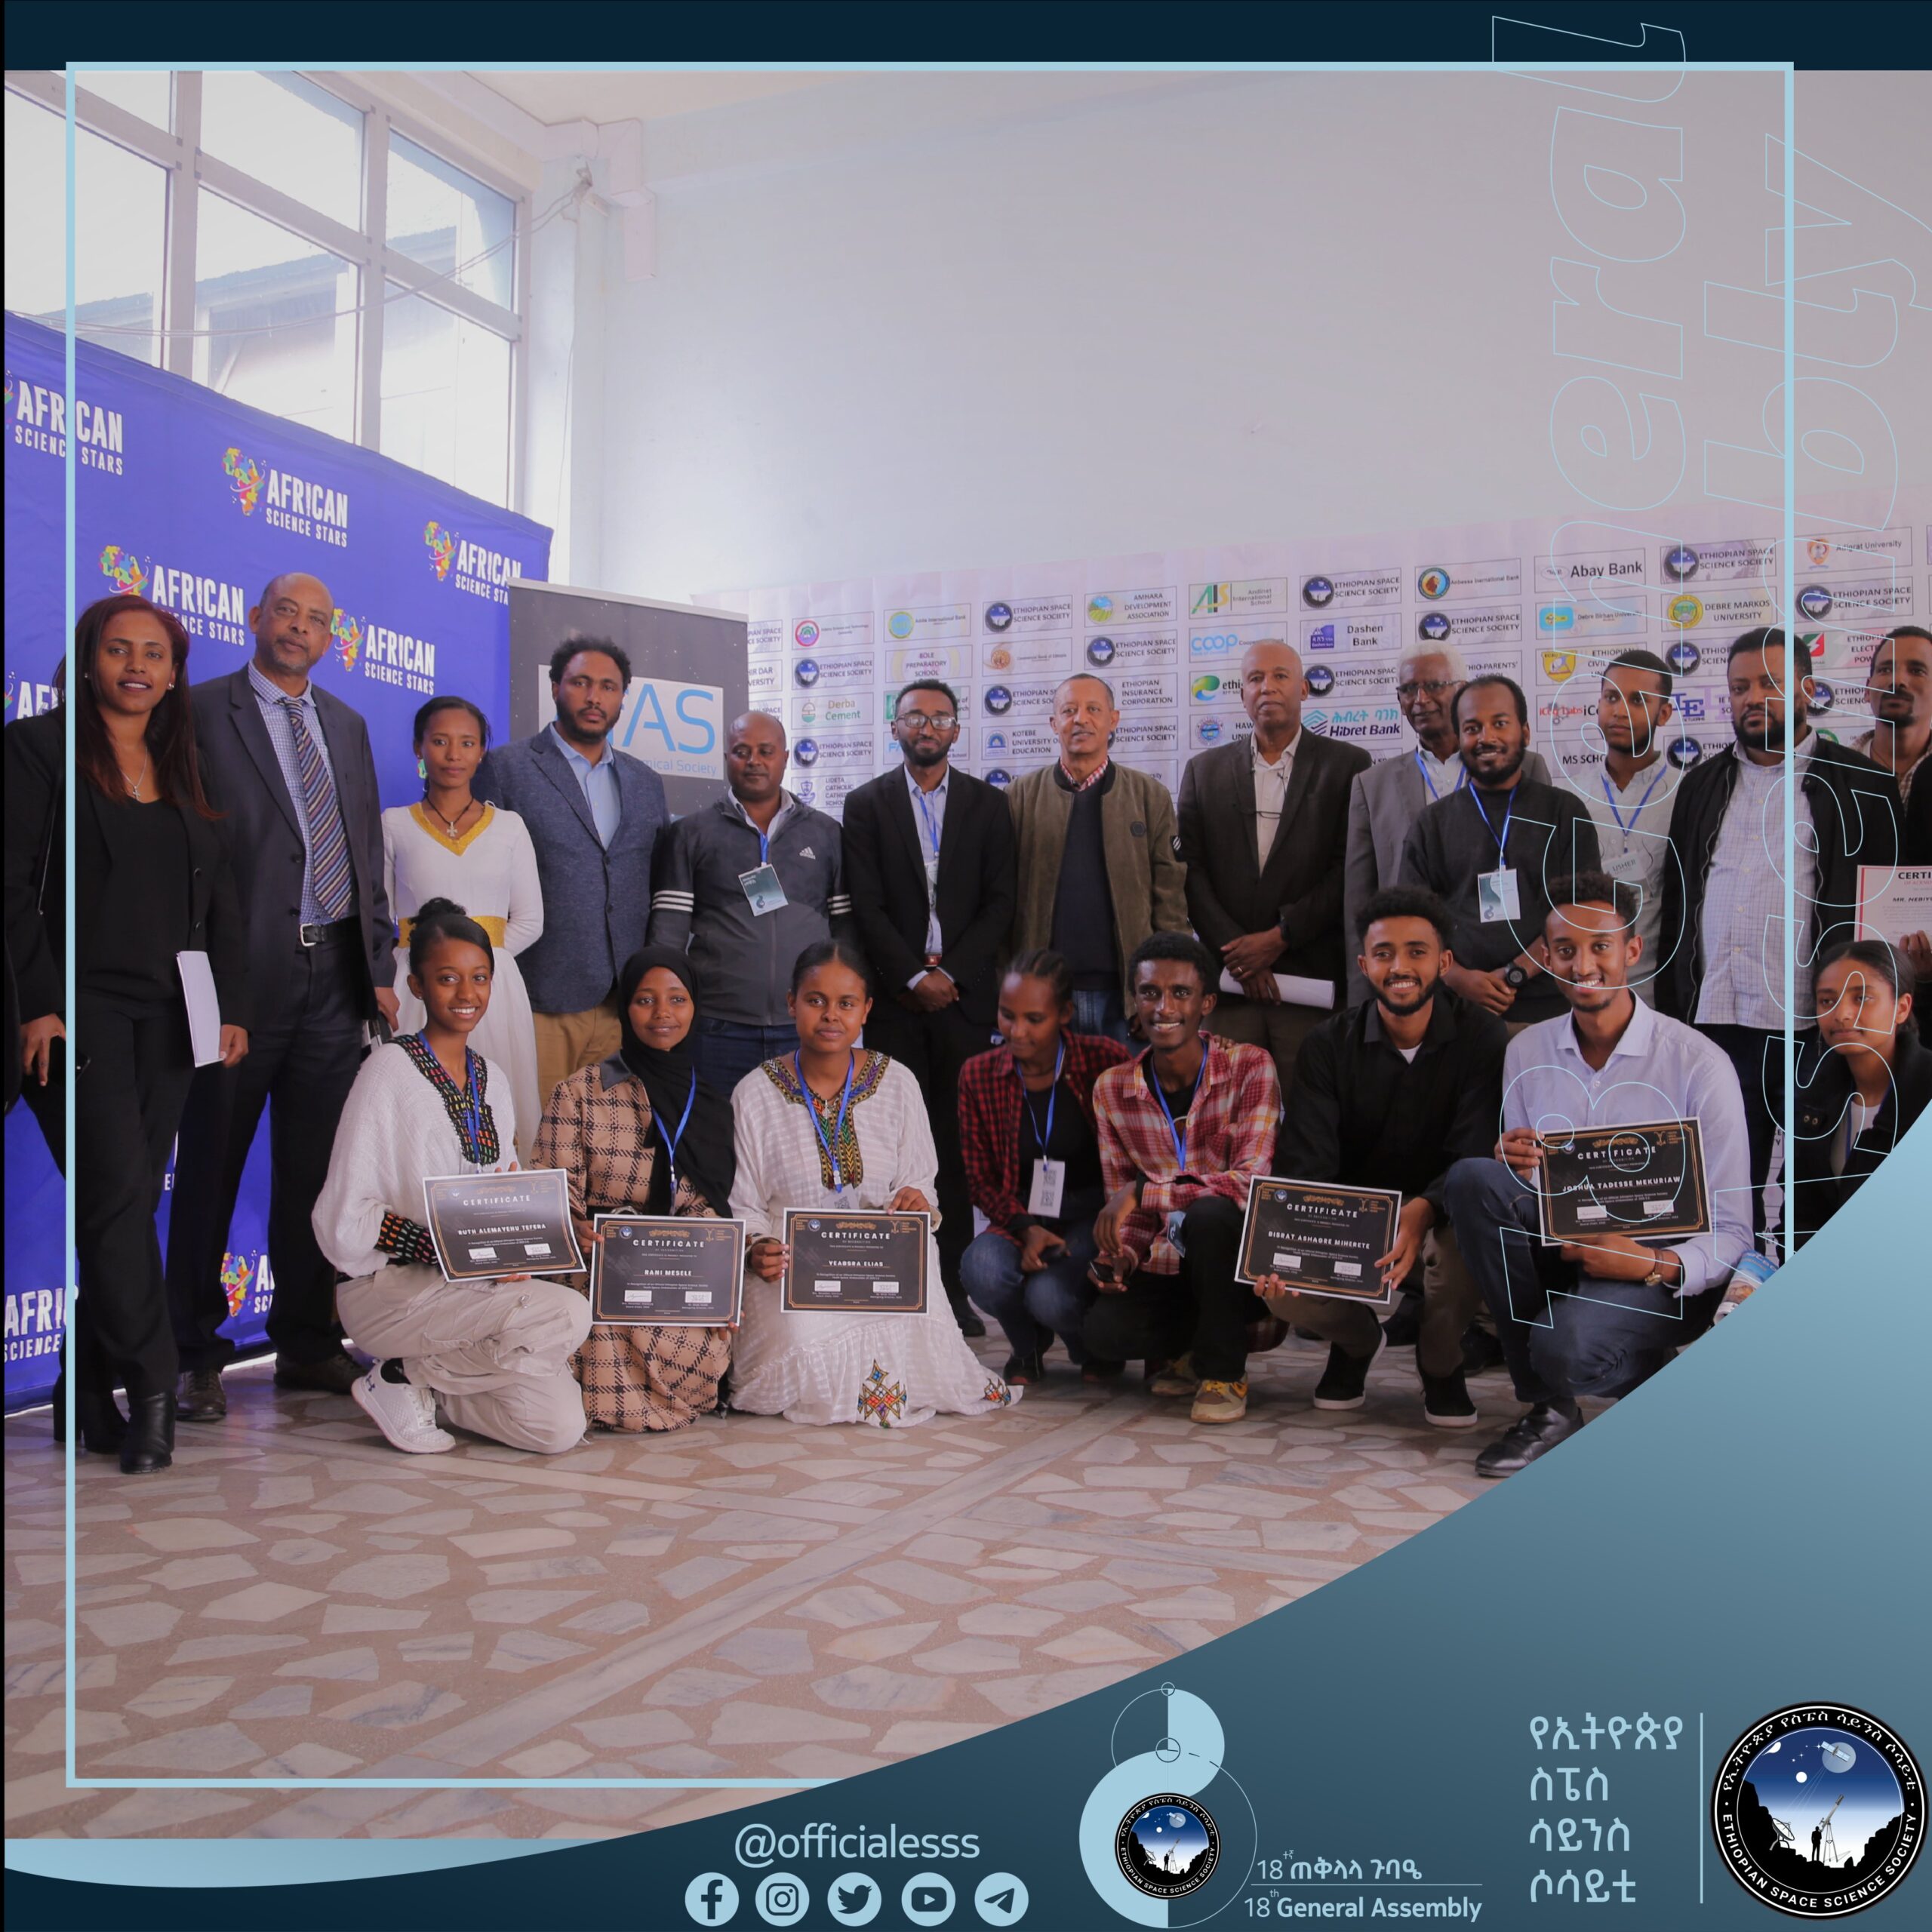 ESSS 18th General Assembly: Empowering Ethiopian Space Science and Inspiring Future Generations